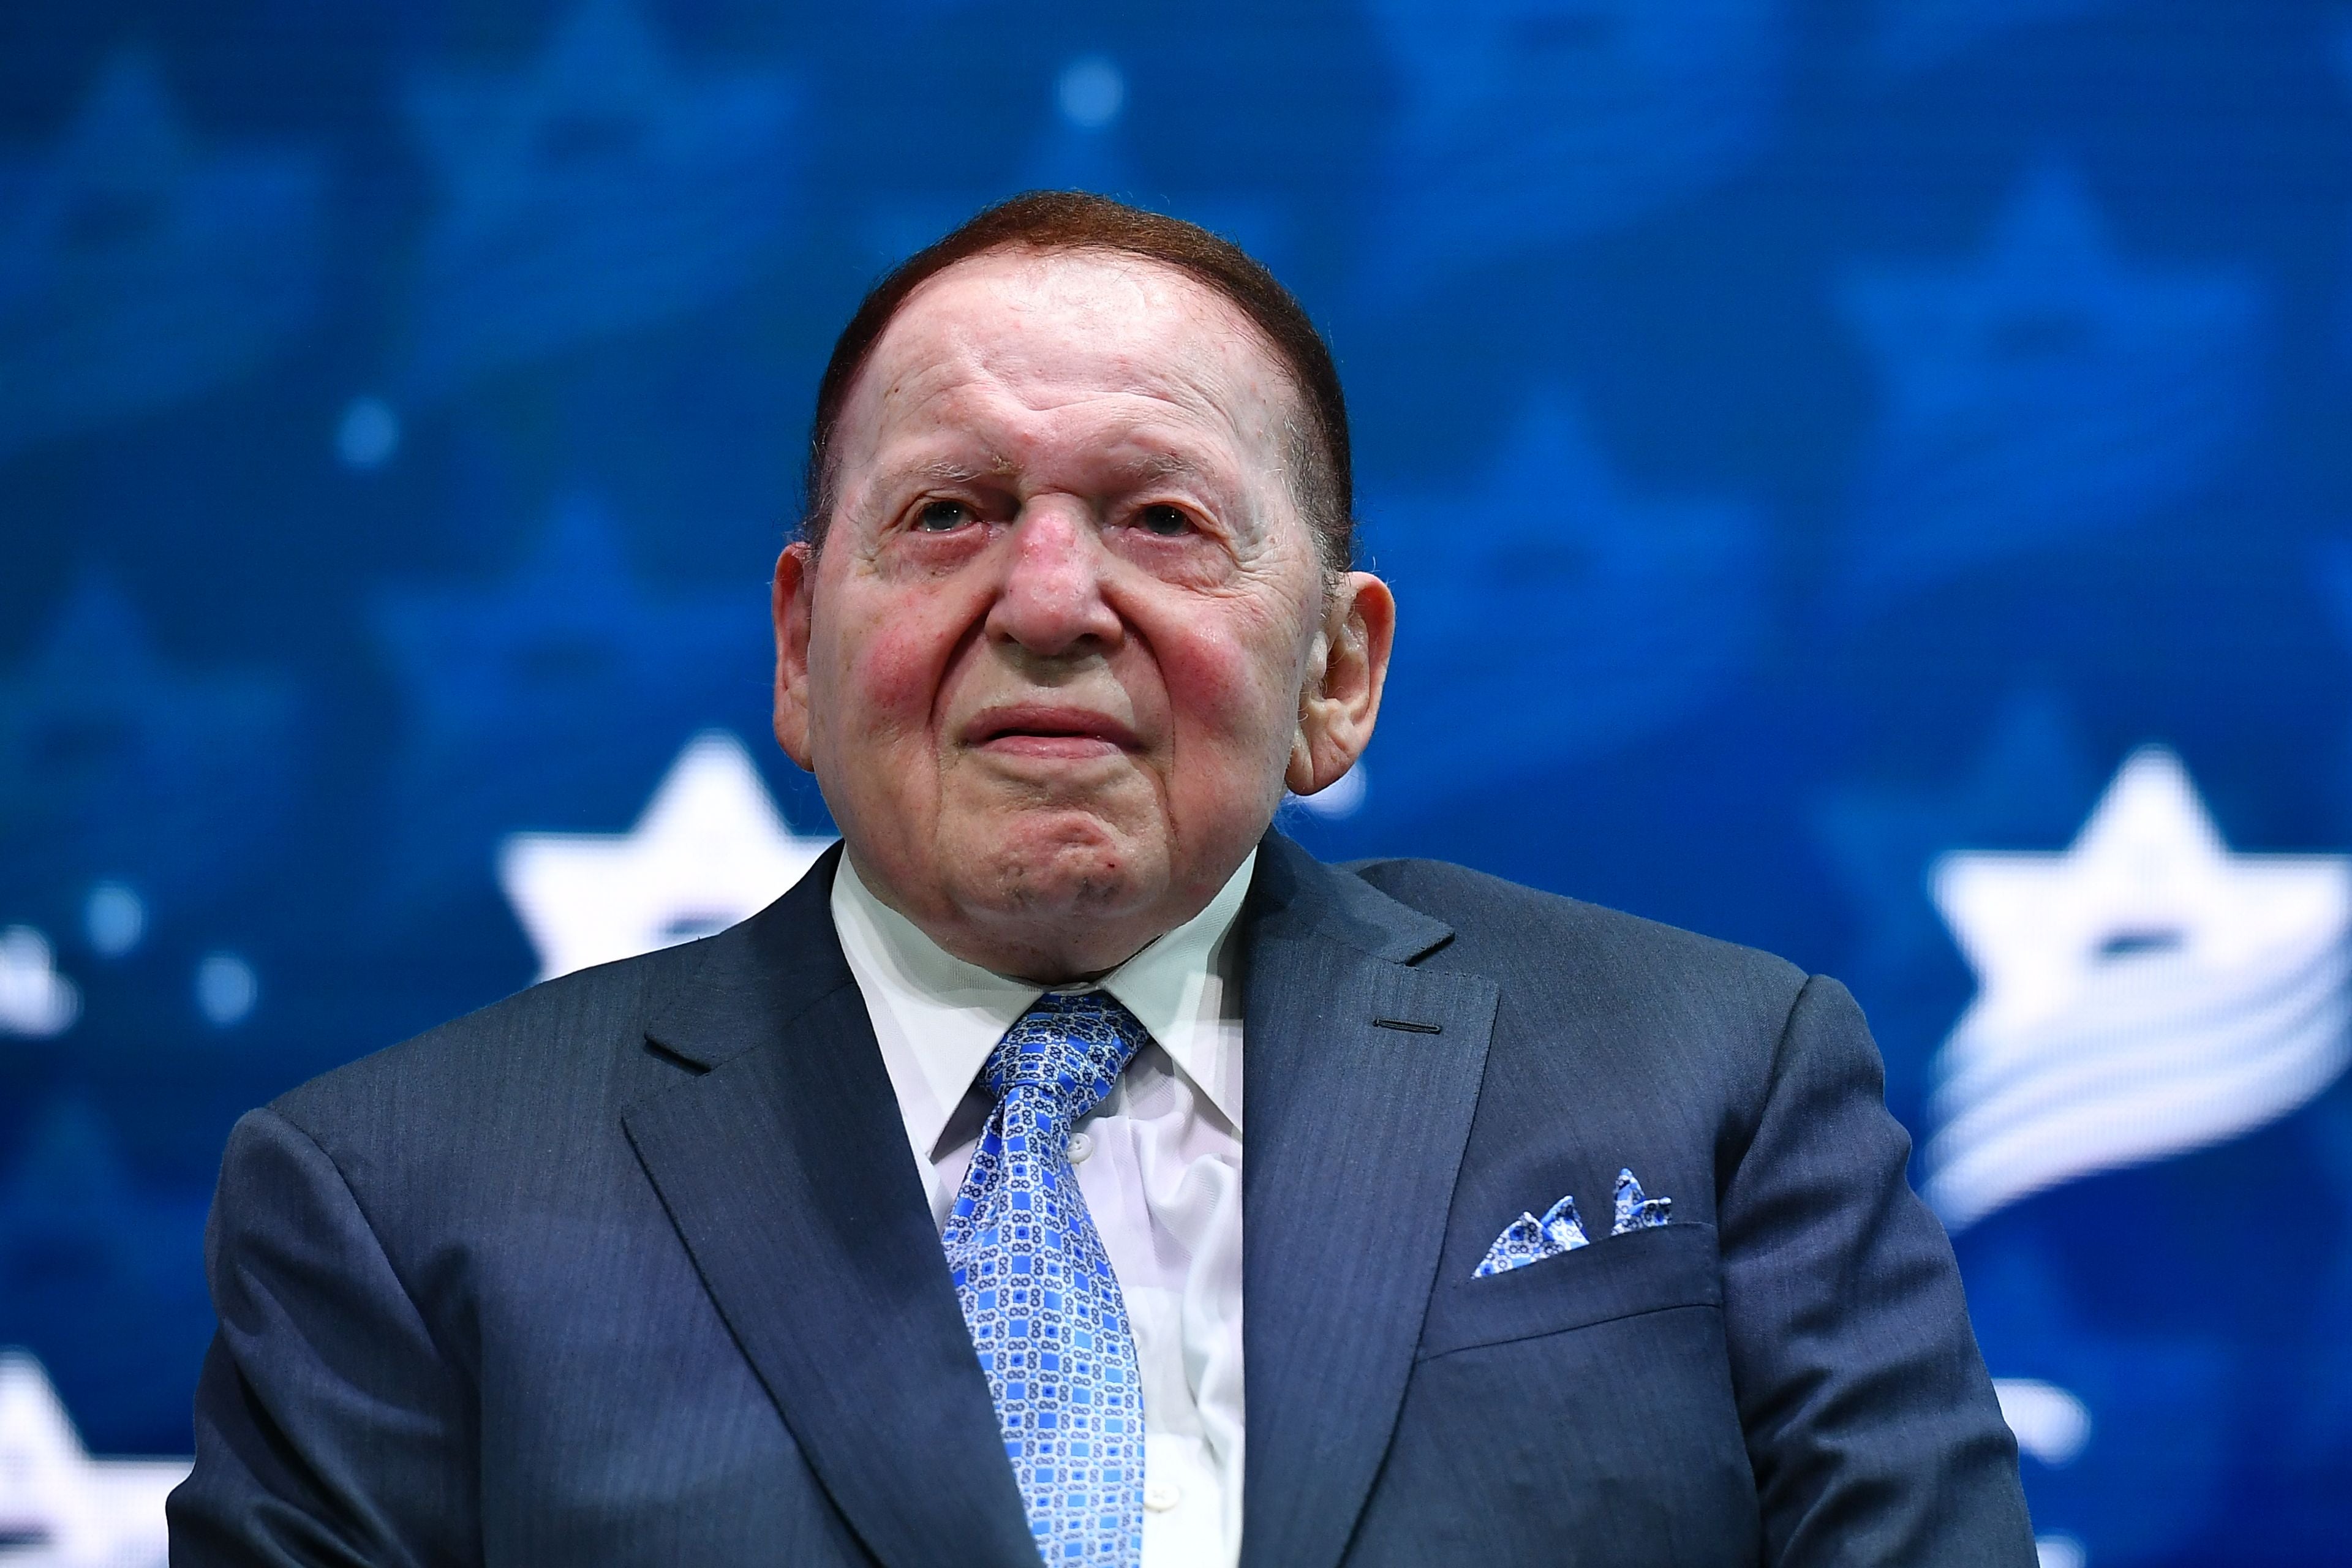 Republican donor and Las Vegas casino mogule, Sheldon Adelson, pictured in 2019. He donated $90million to Trump’s 2020 campaign. He died in January this year.